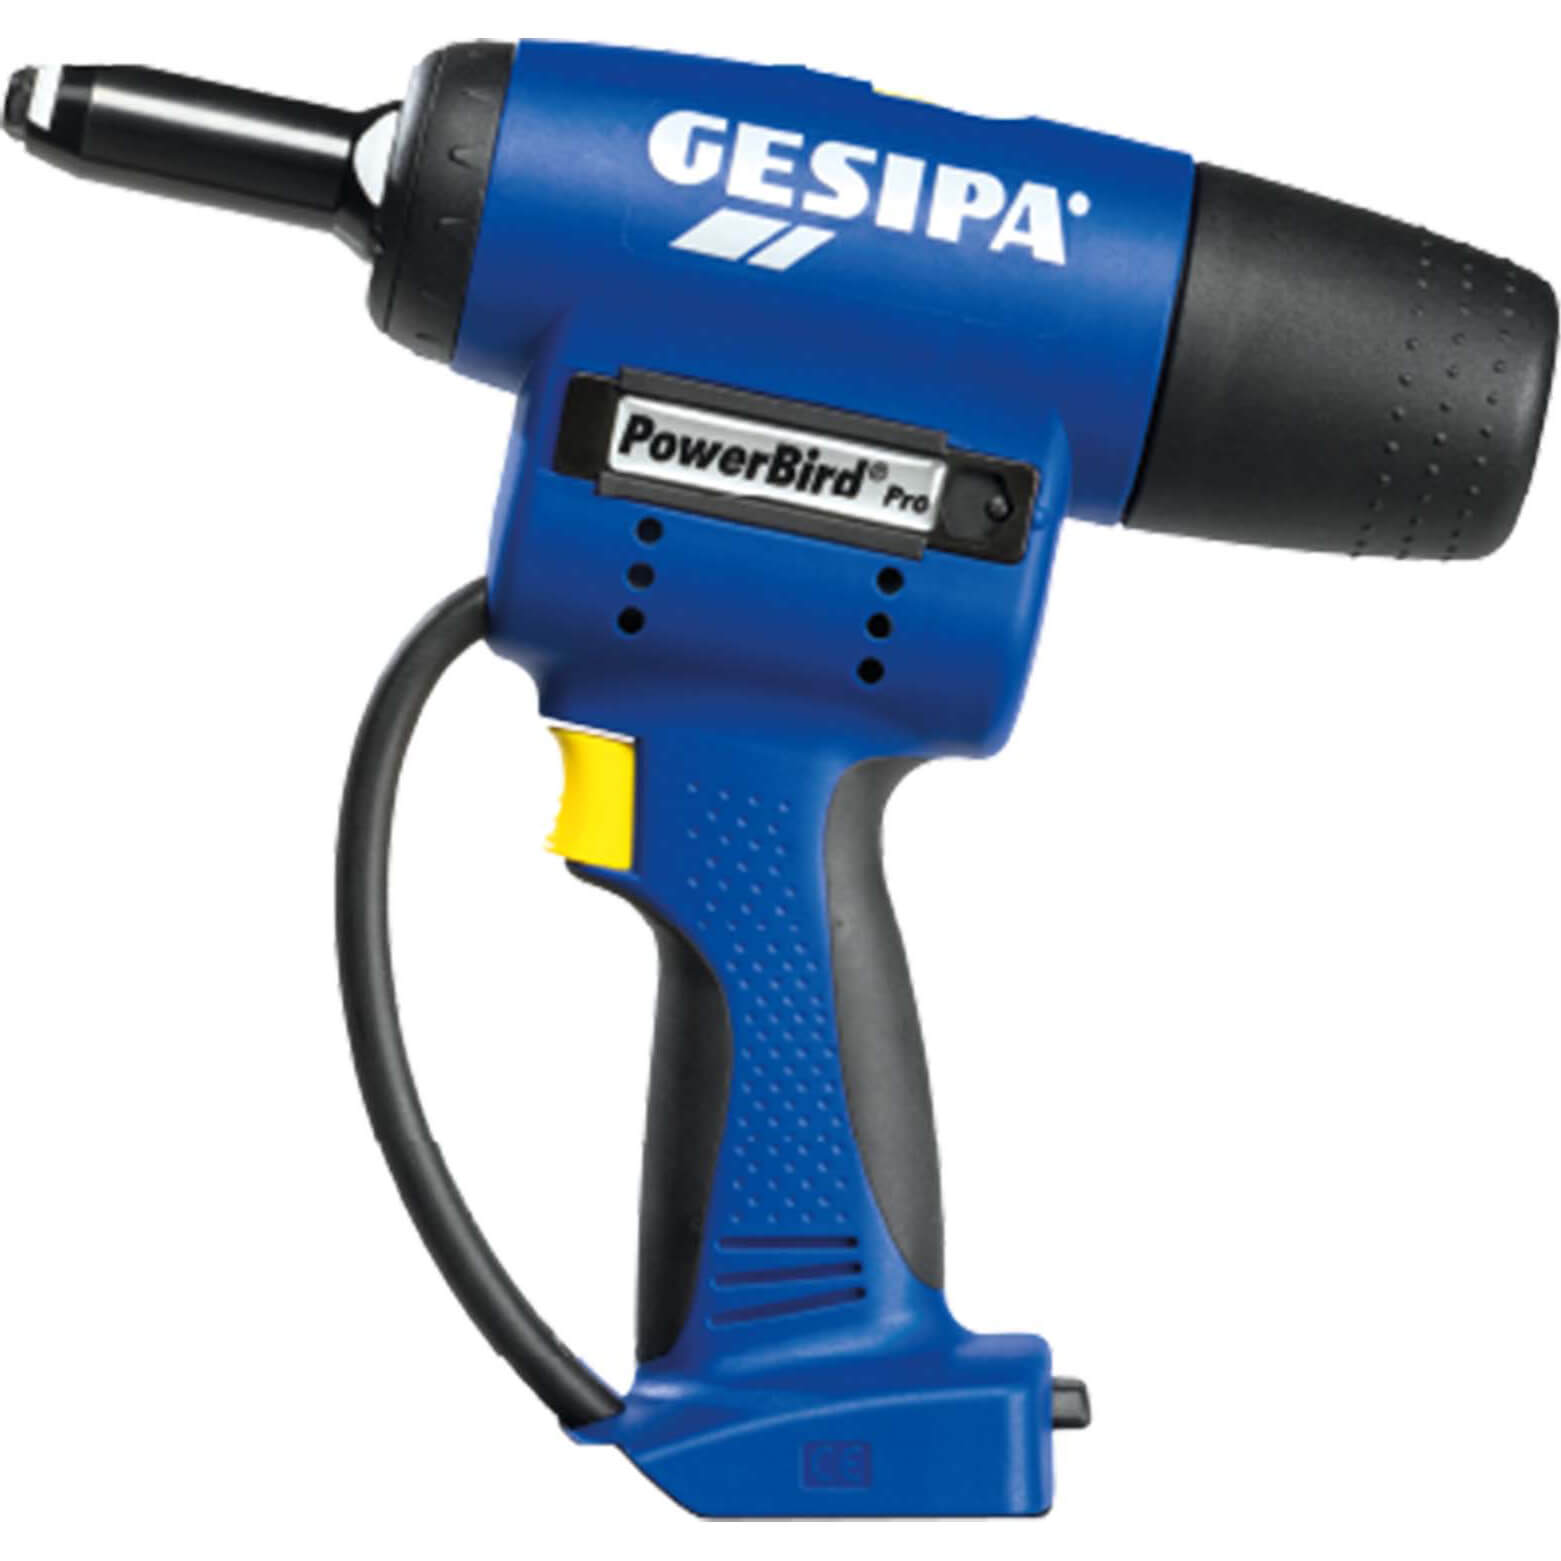 Photo of Gesipa Powerbird Pro Gold Edition Cordless Riveter No Batteries No Charger No Case